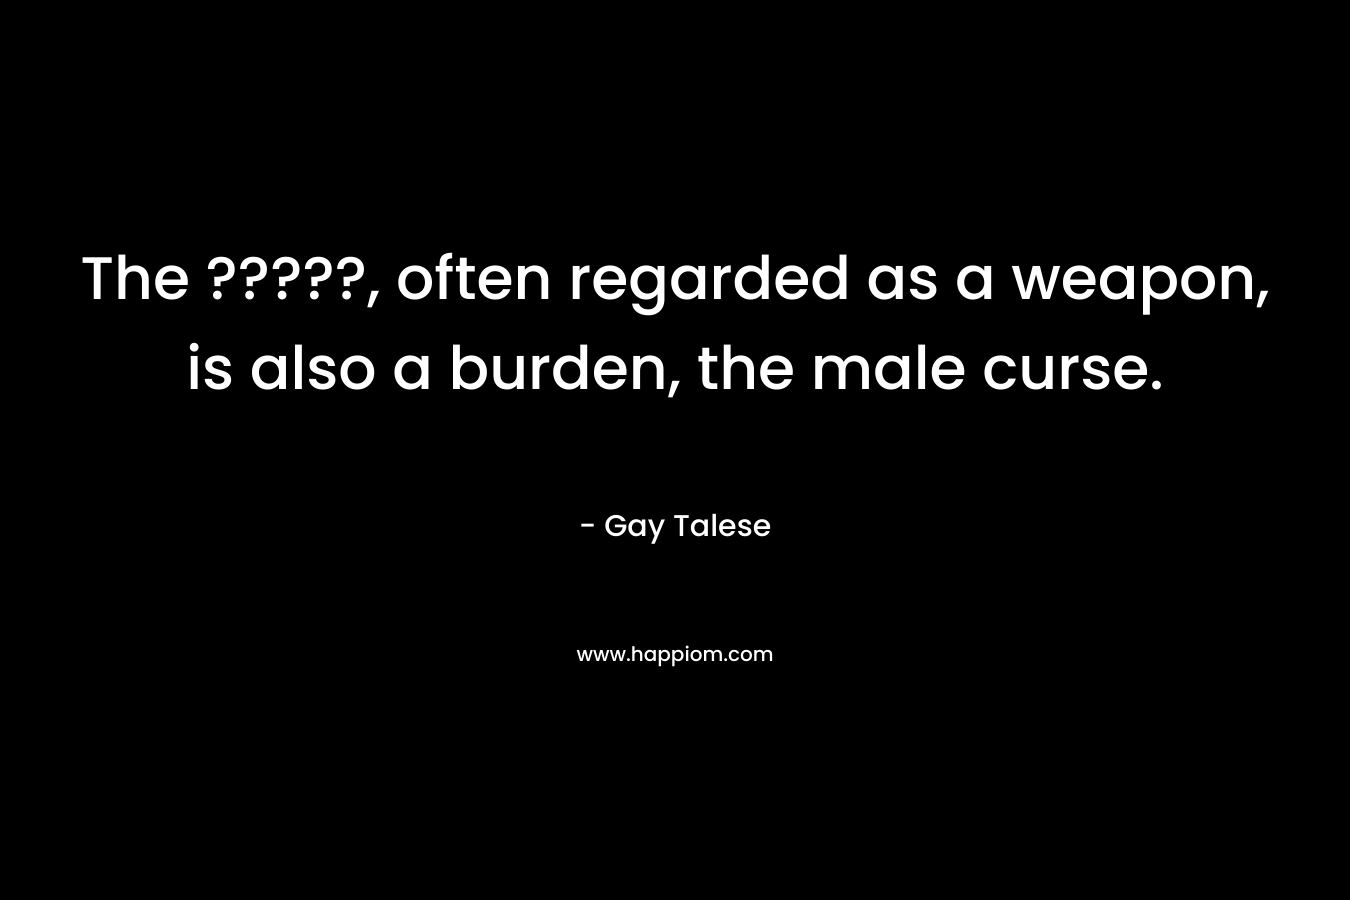 The ?????, often regarded as a weapon, is also a burden, the male curse.